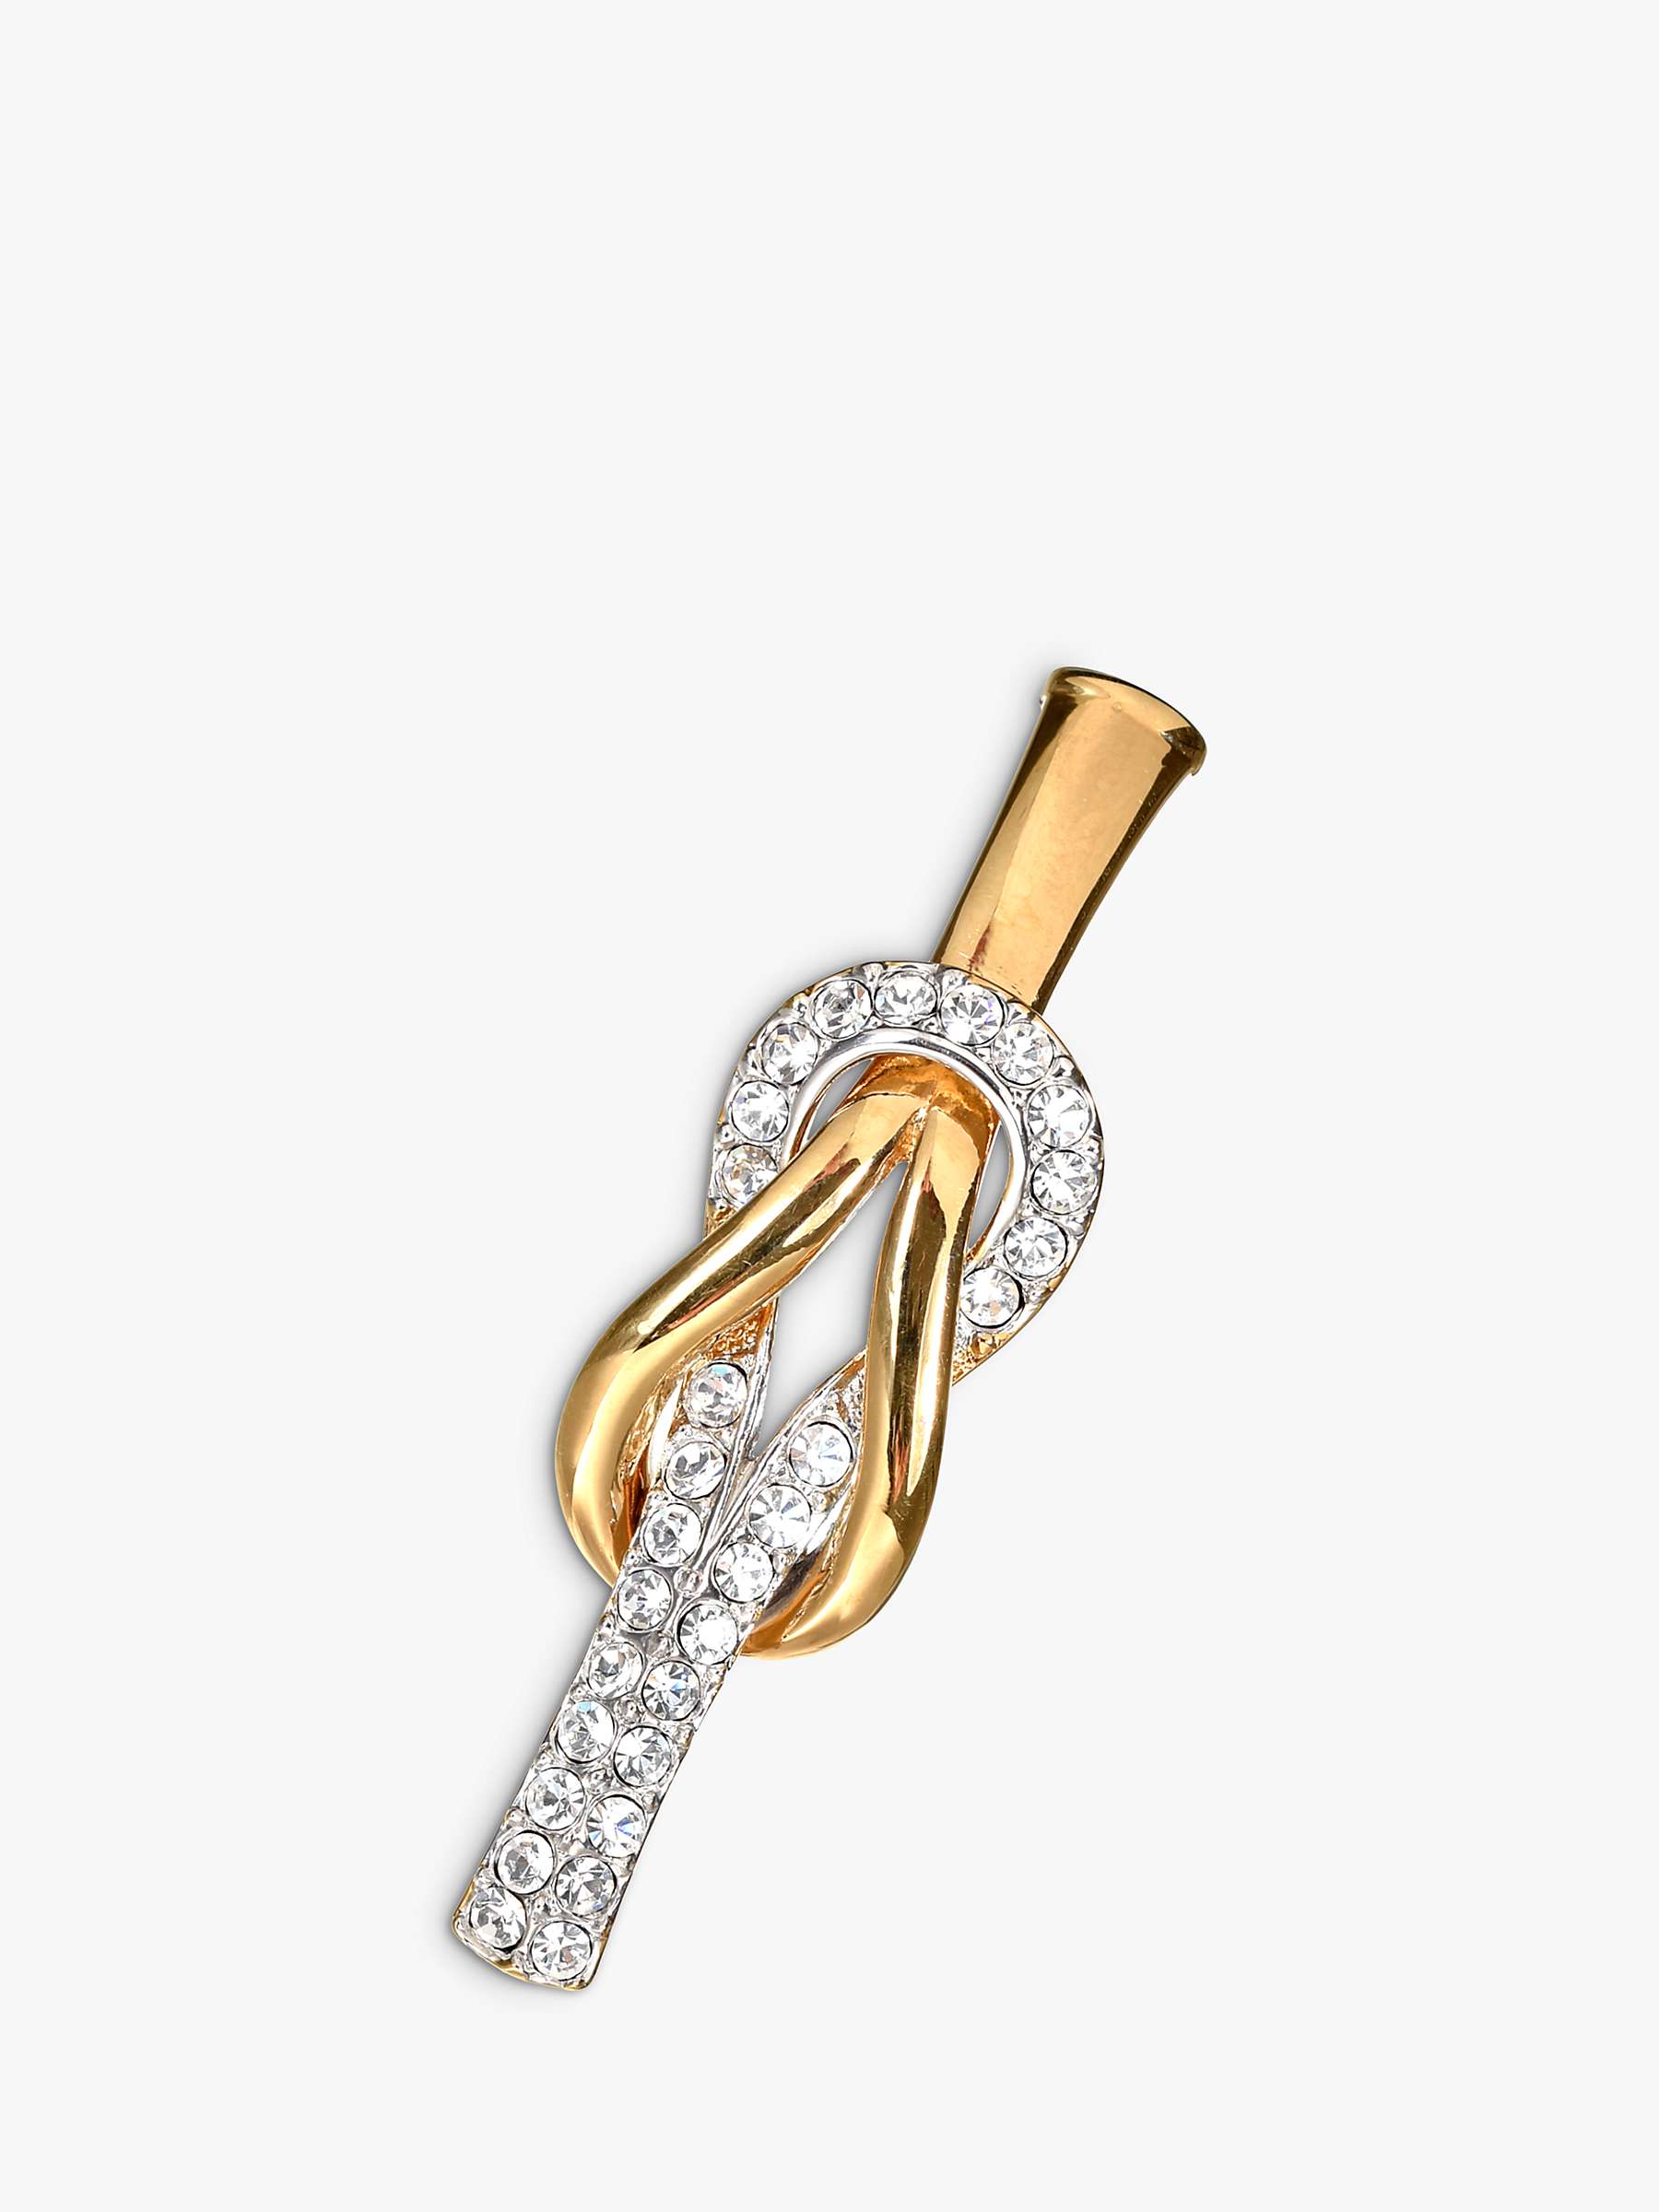 Buy Eclectica Vintage Attwood & Sawyer 22ct Gold Plated Swarovski Crystal Knot Bar Brooch, Dated Circa 1980s Online at johnlewis.com